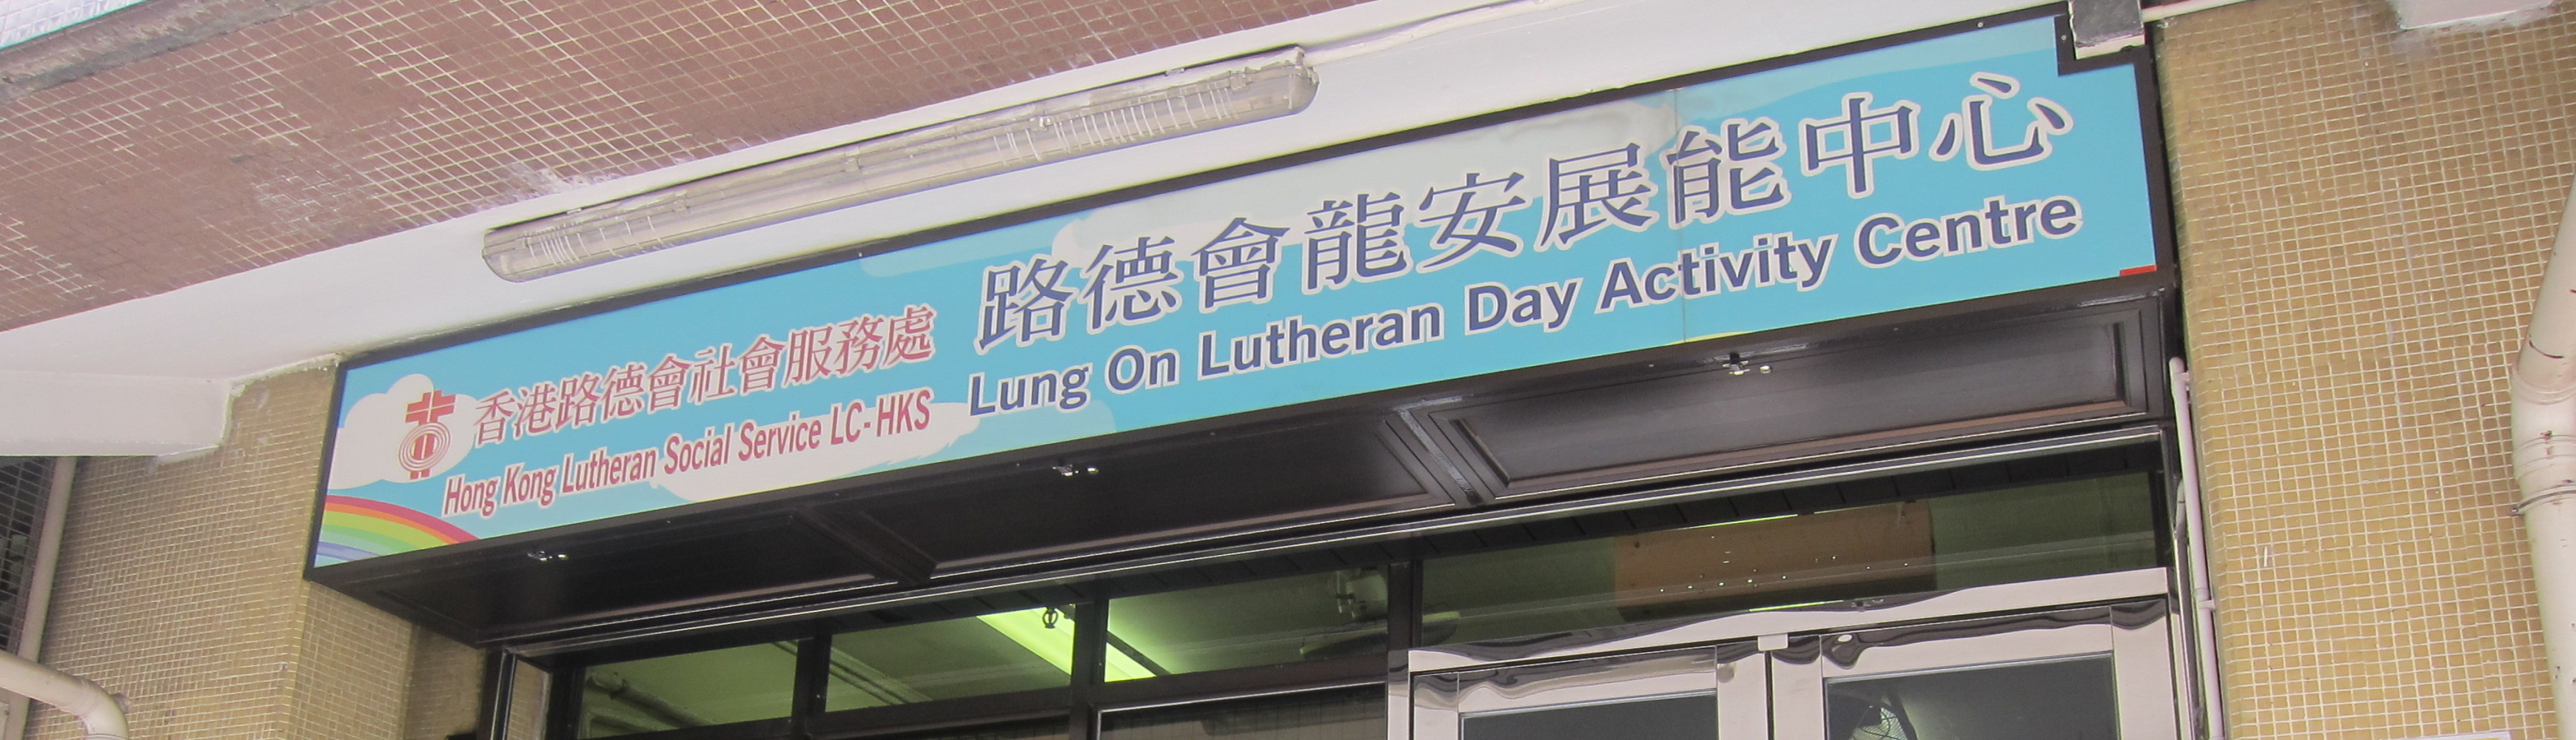 Lung On Lutheran Day Activity Centre